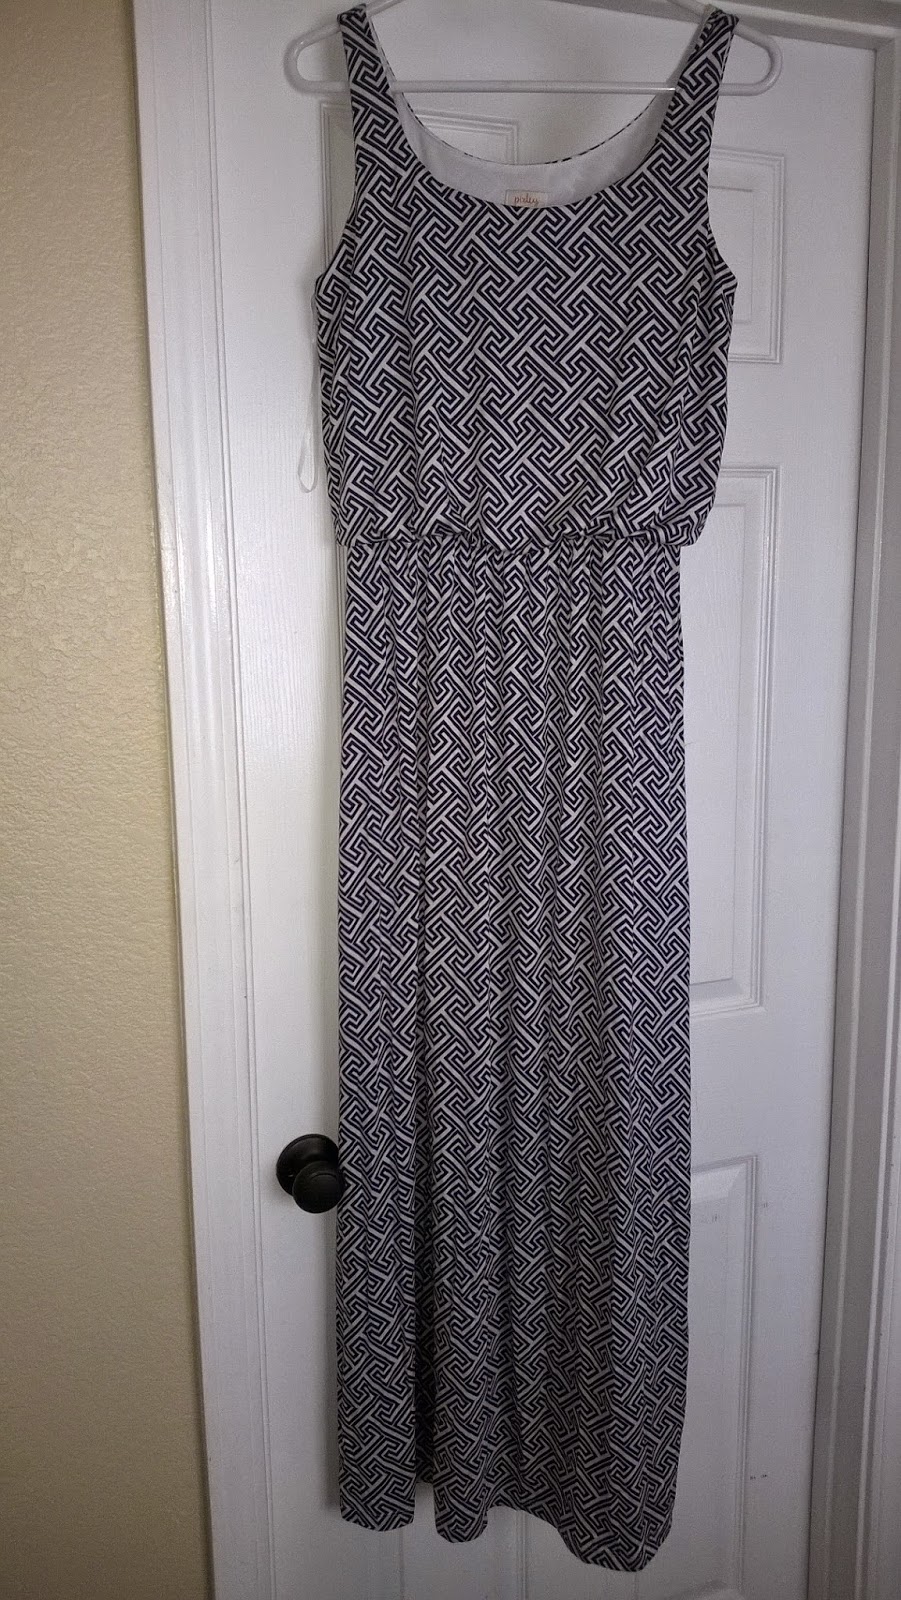 Nully Baby Blog: Stitch Fix Review #13